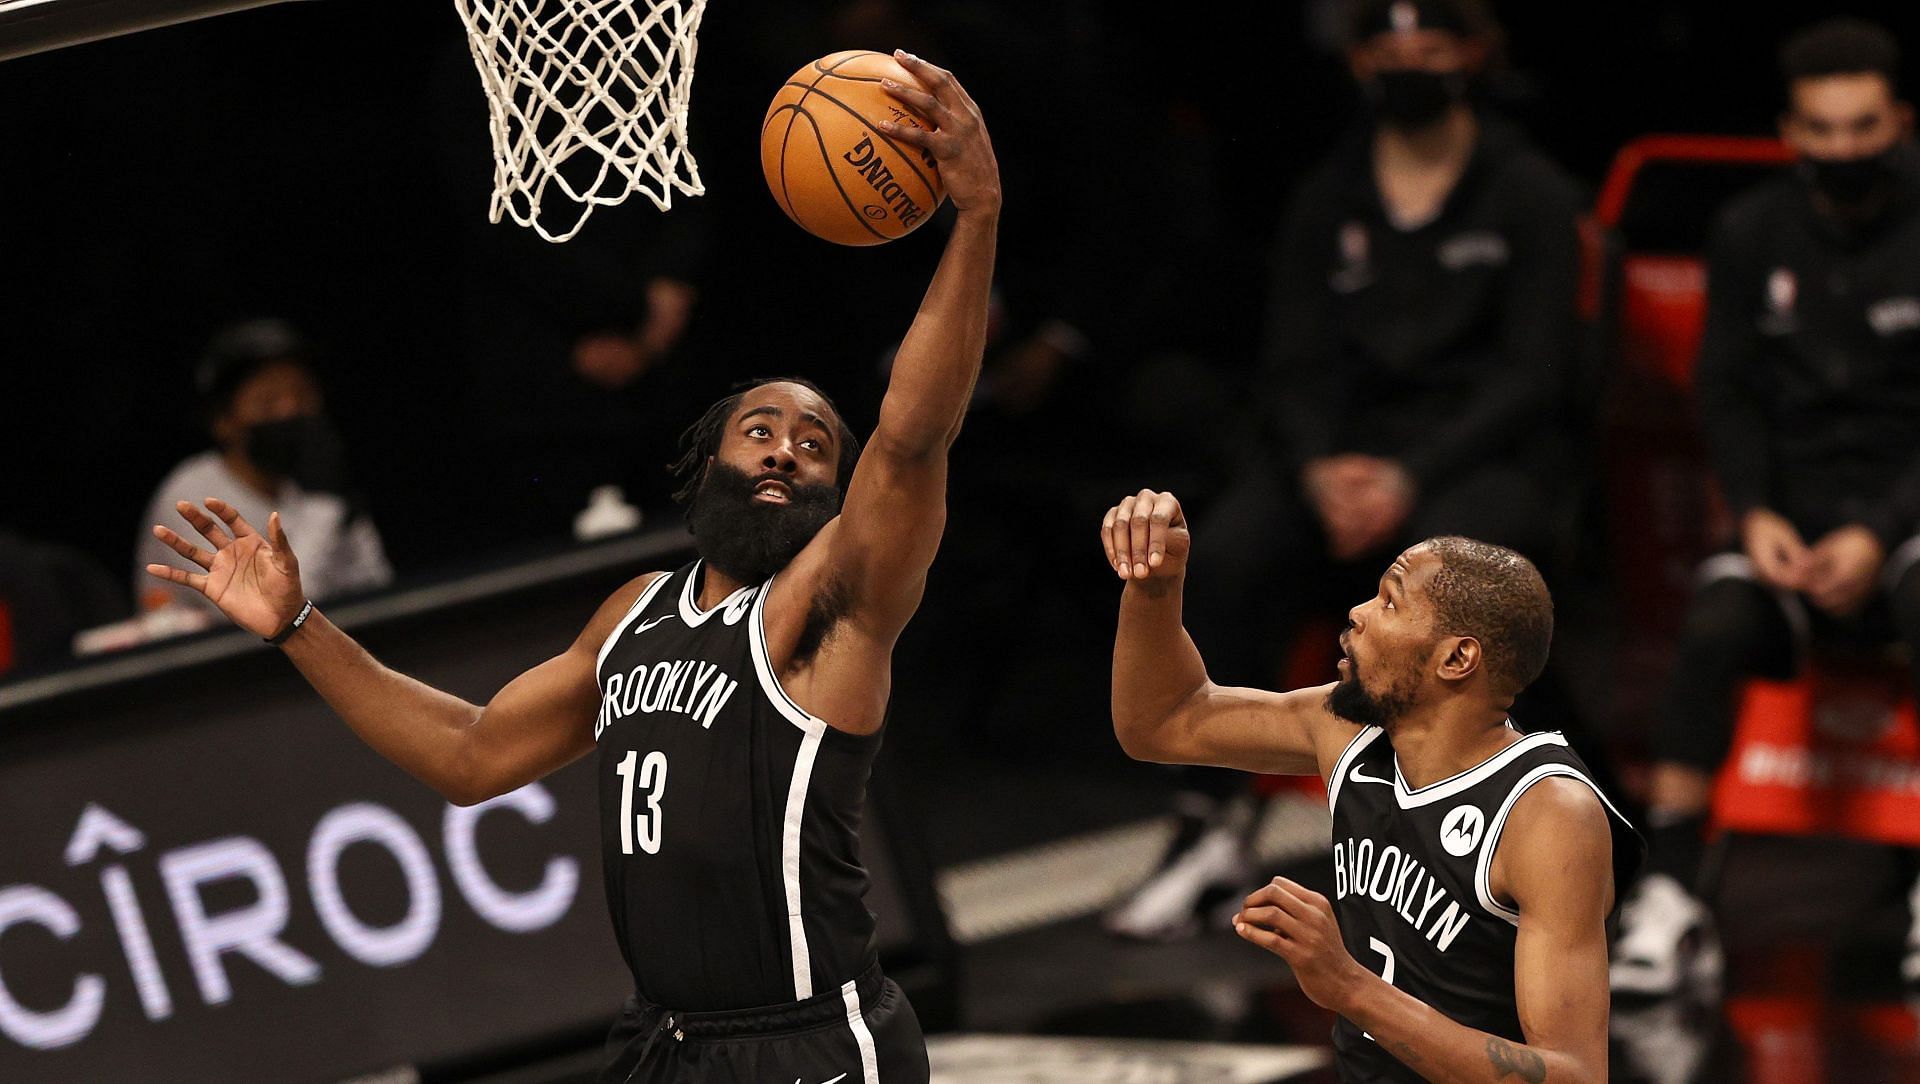 Despite the triple-doubles, James Harden of the Brooklyn Nets is still underrated as a rebounder [Photo: Heavy.com]